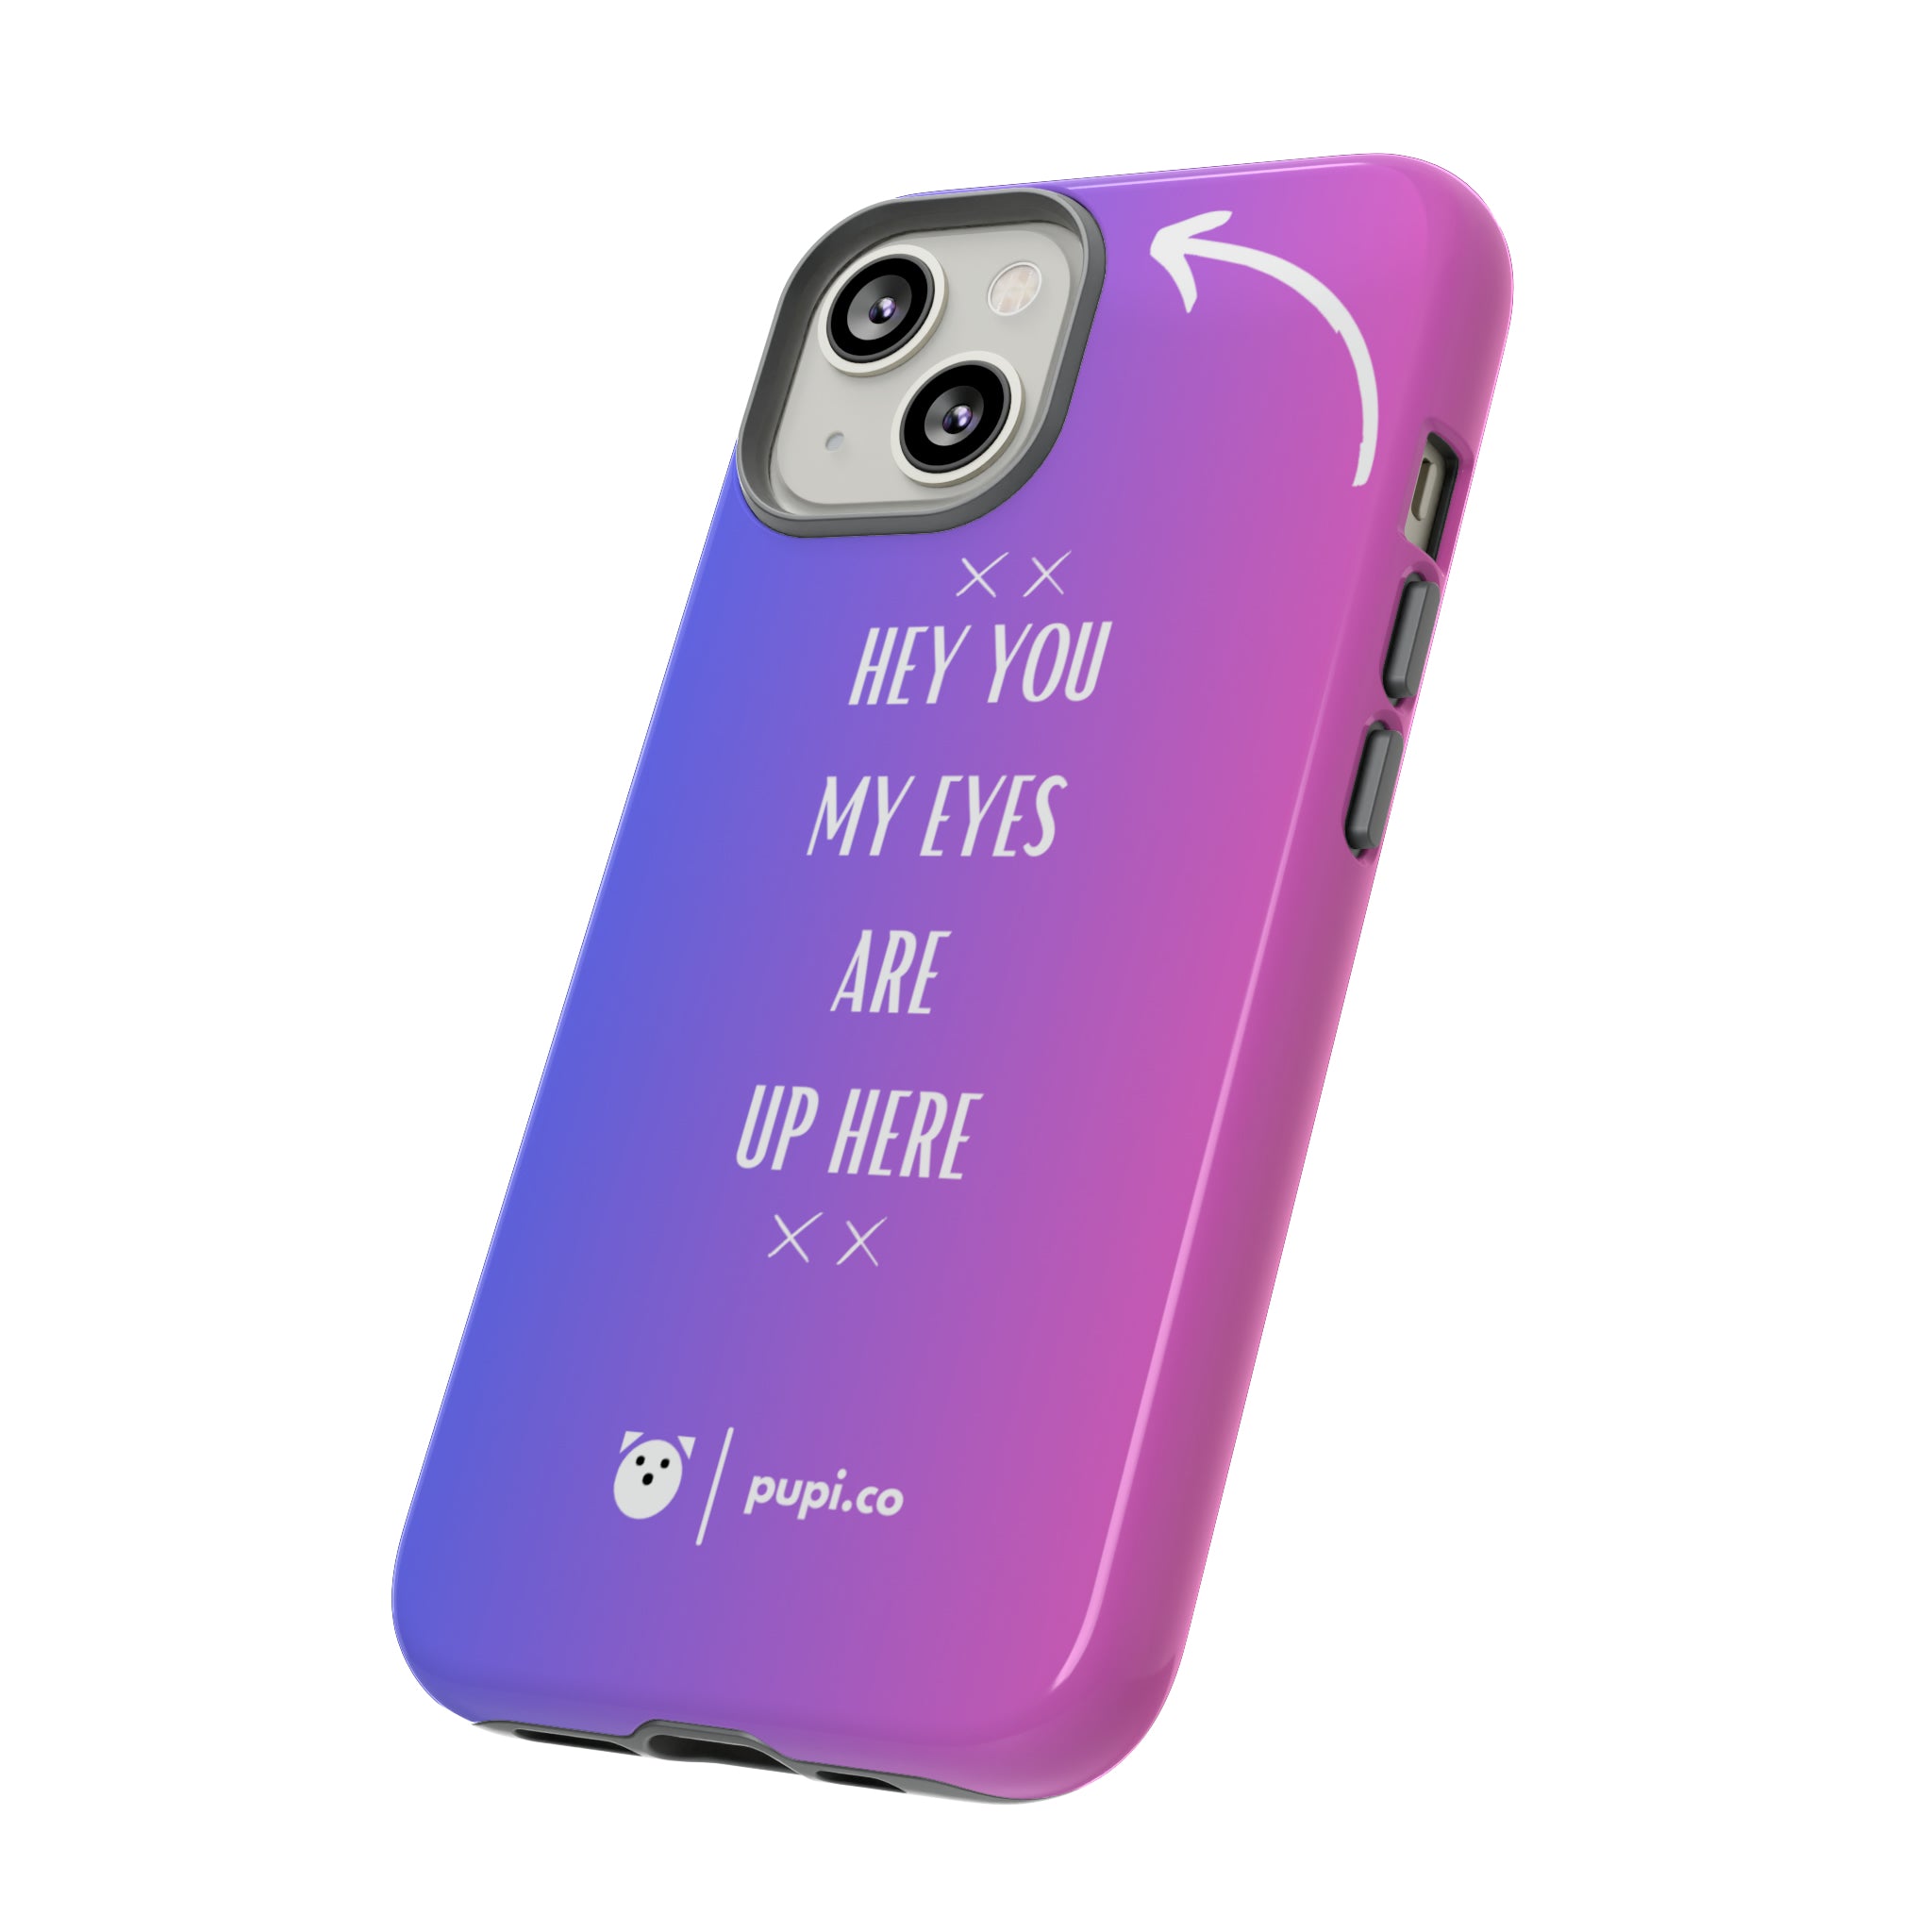 hey you | Phone case